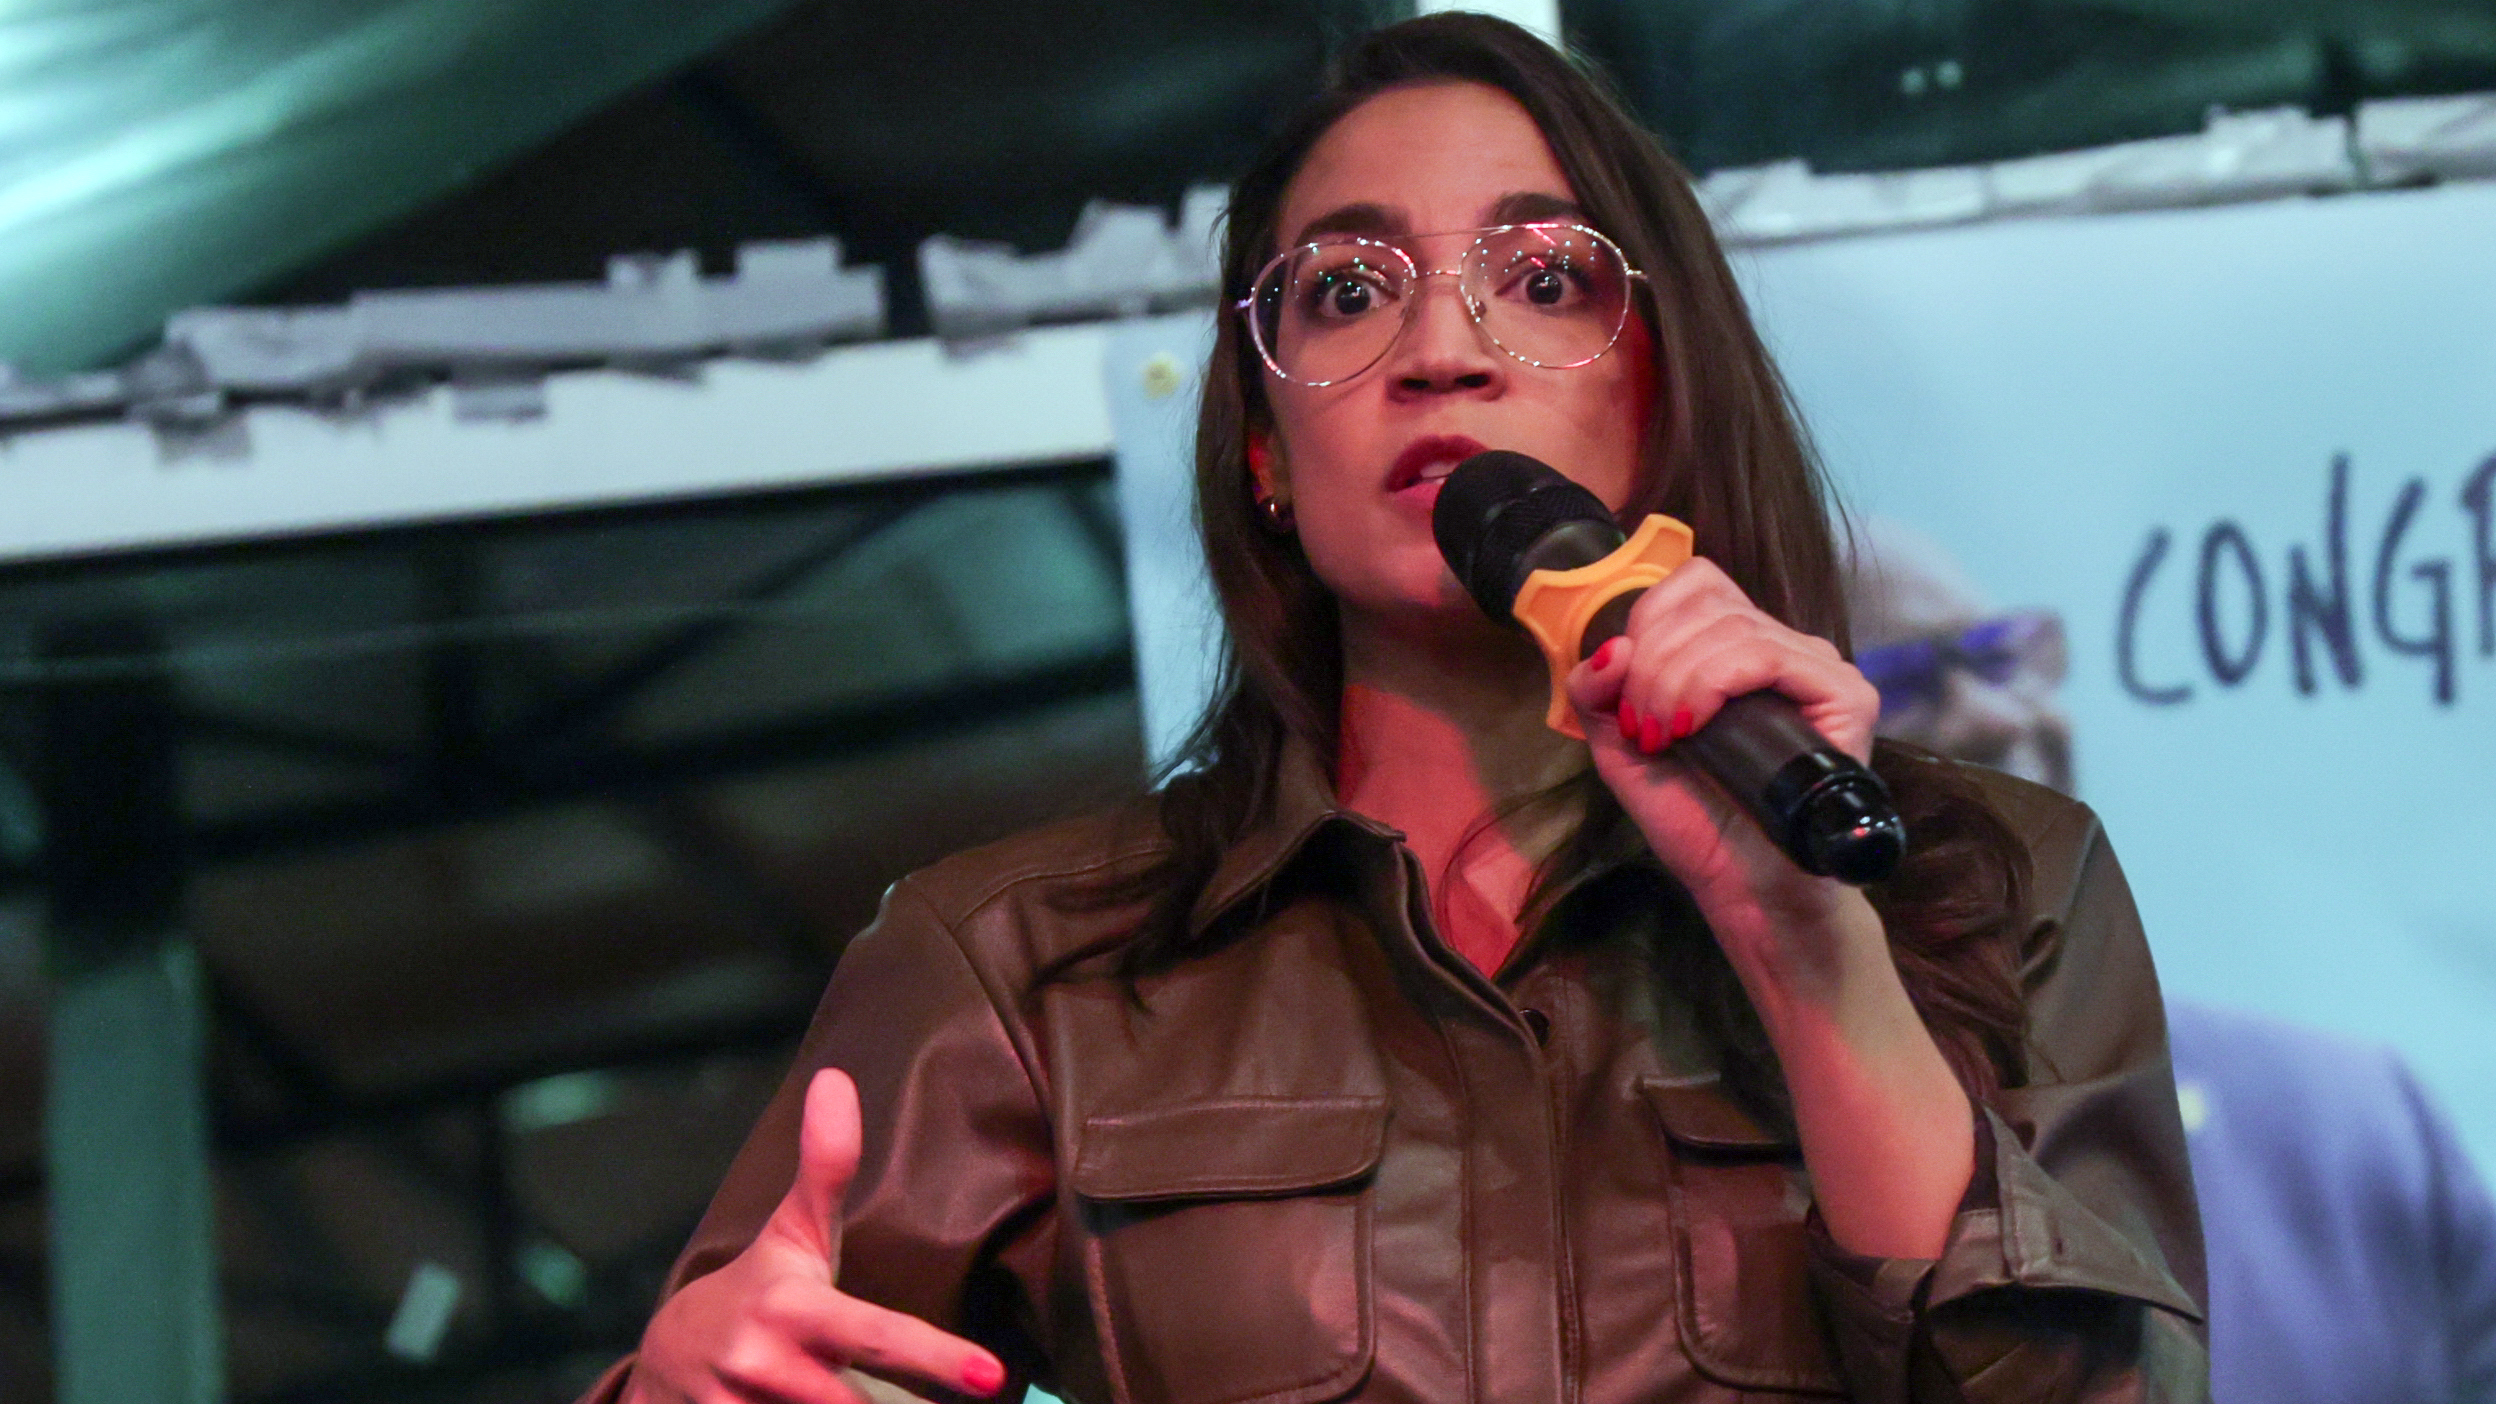 AOC calls for New York to confiscate Trump’s assets, accusing him of inciting a terrorist attack